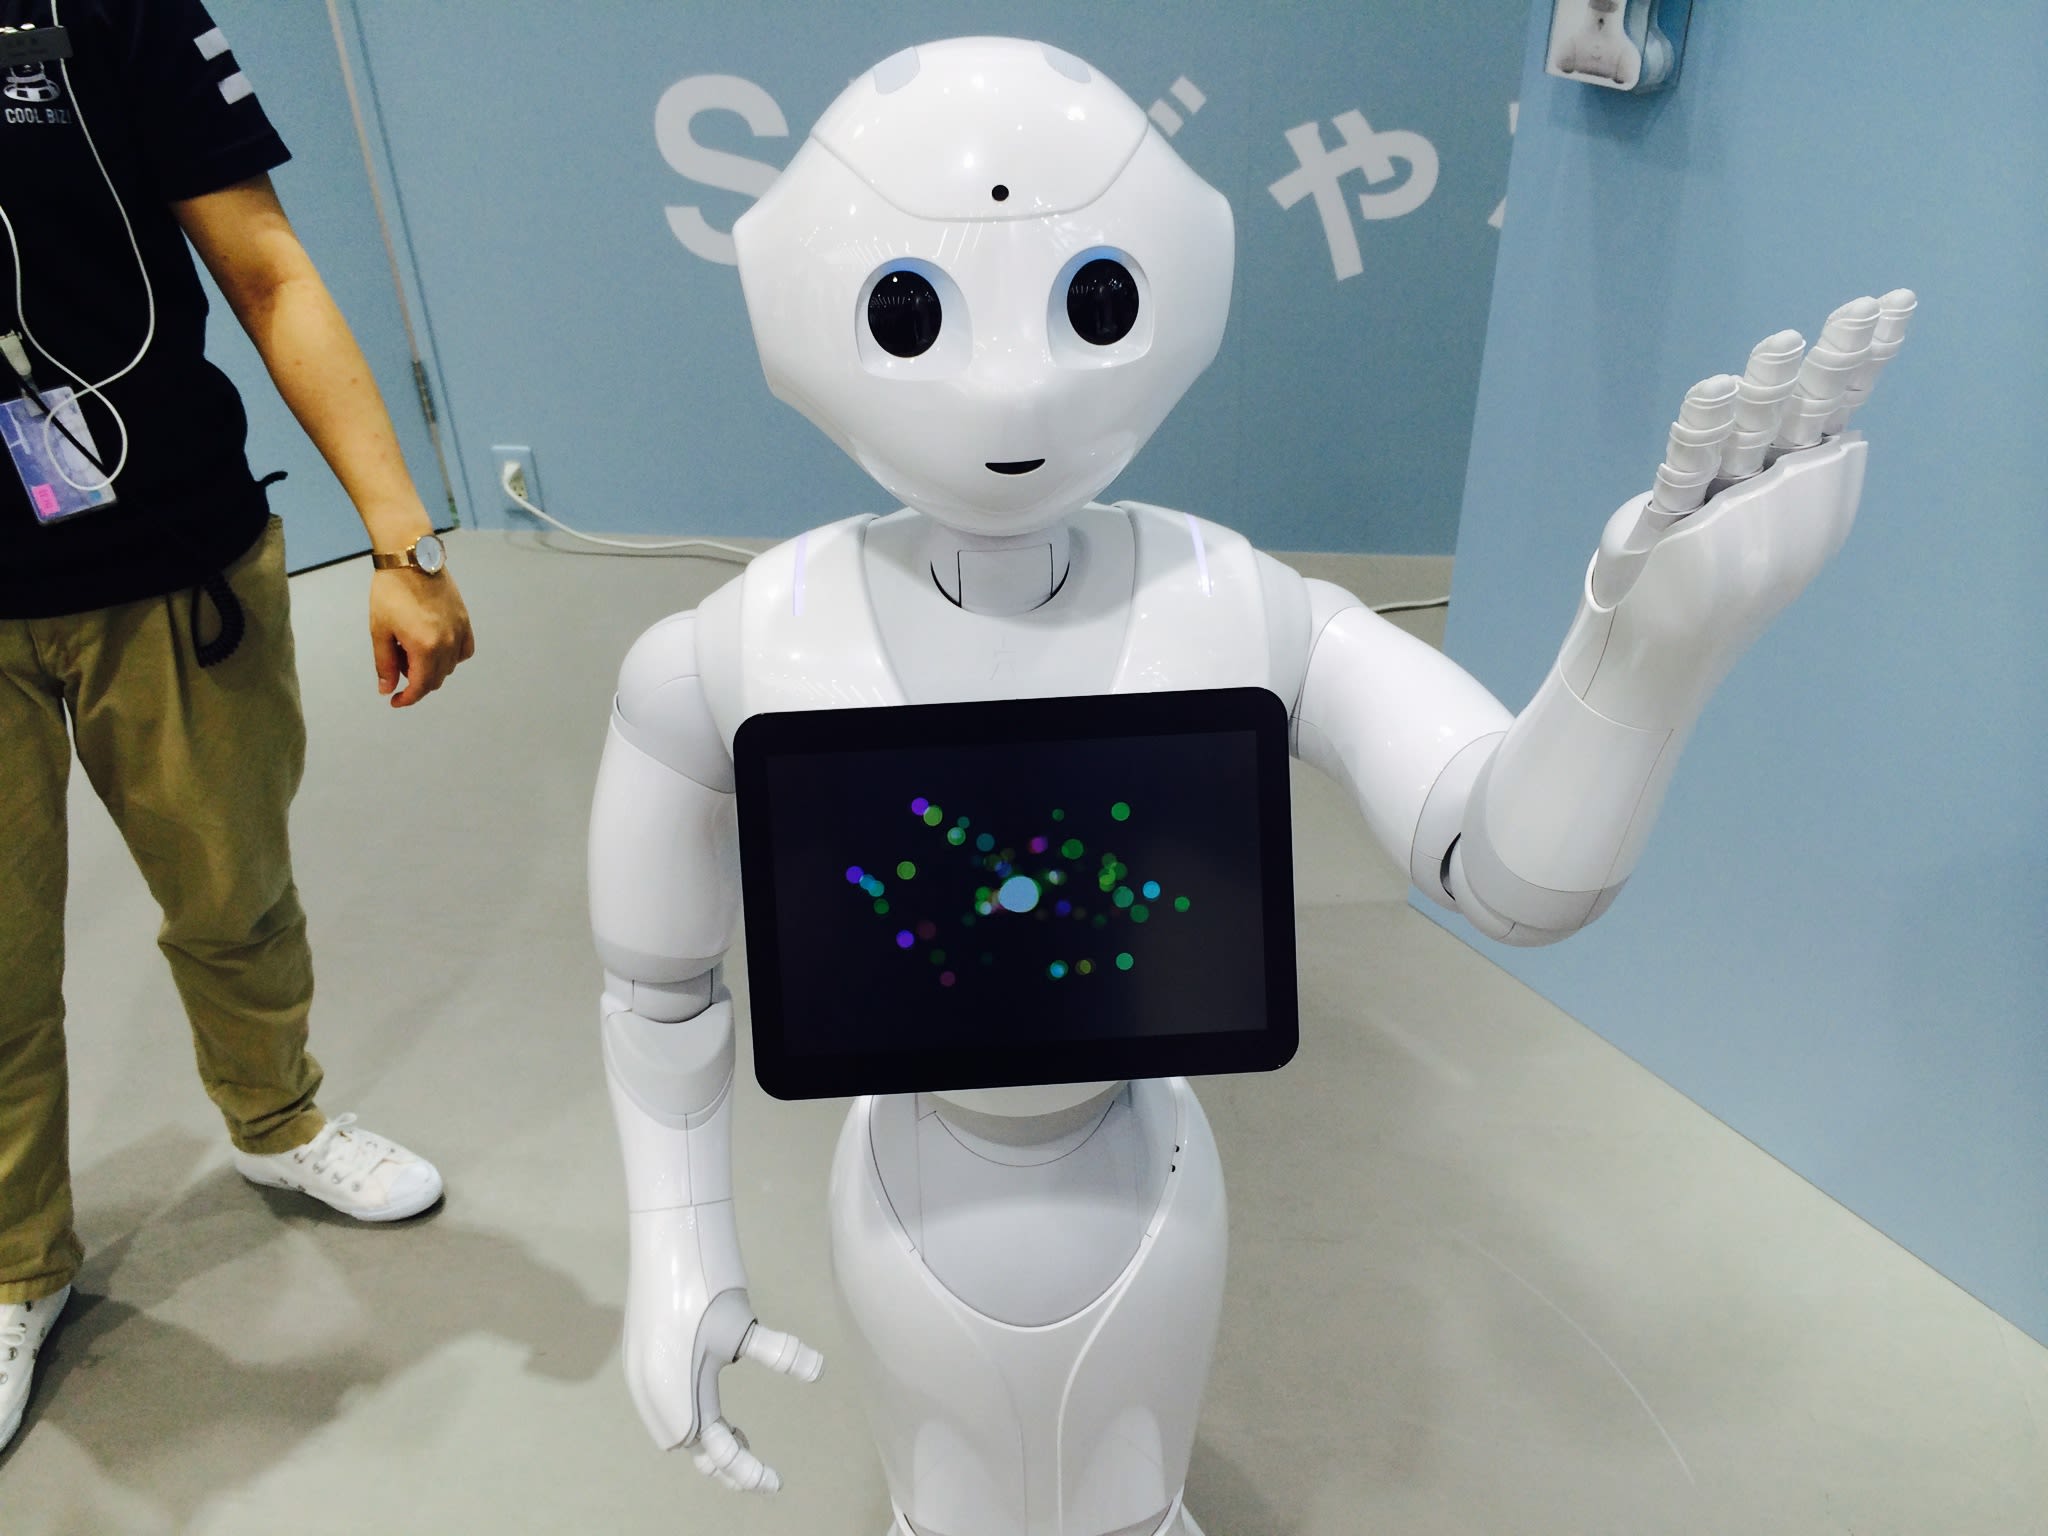 Is this the world's first emo robot?